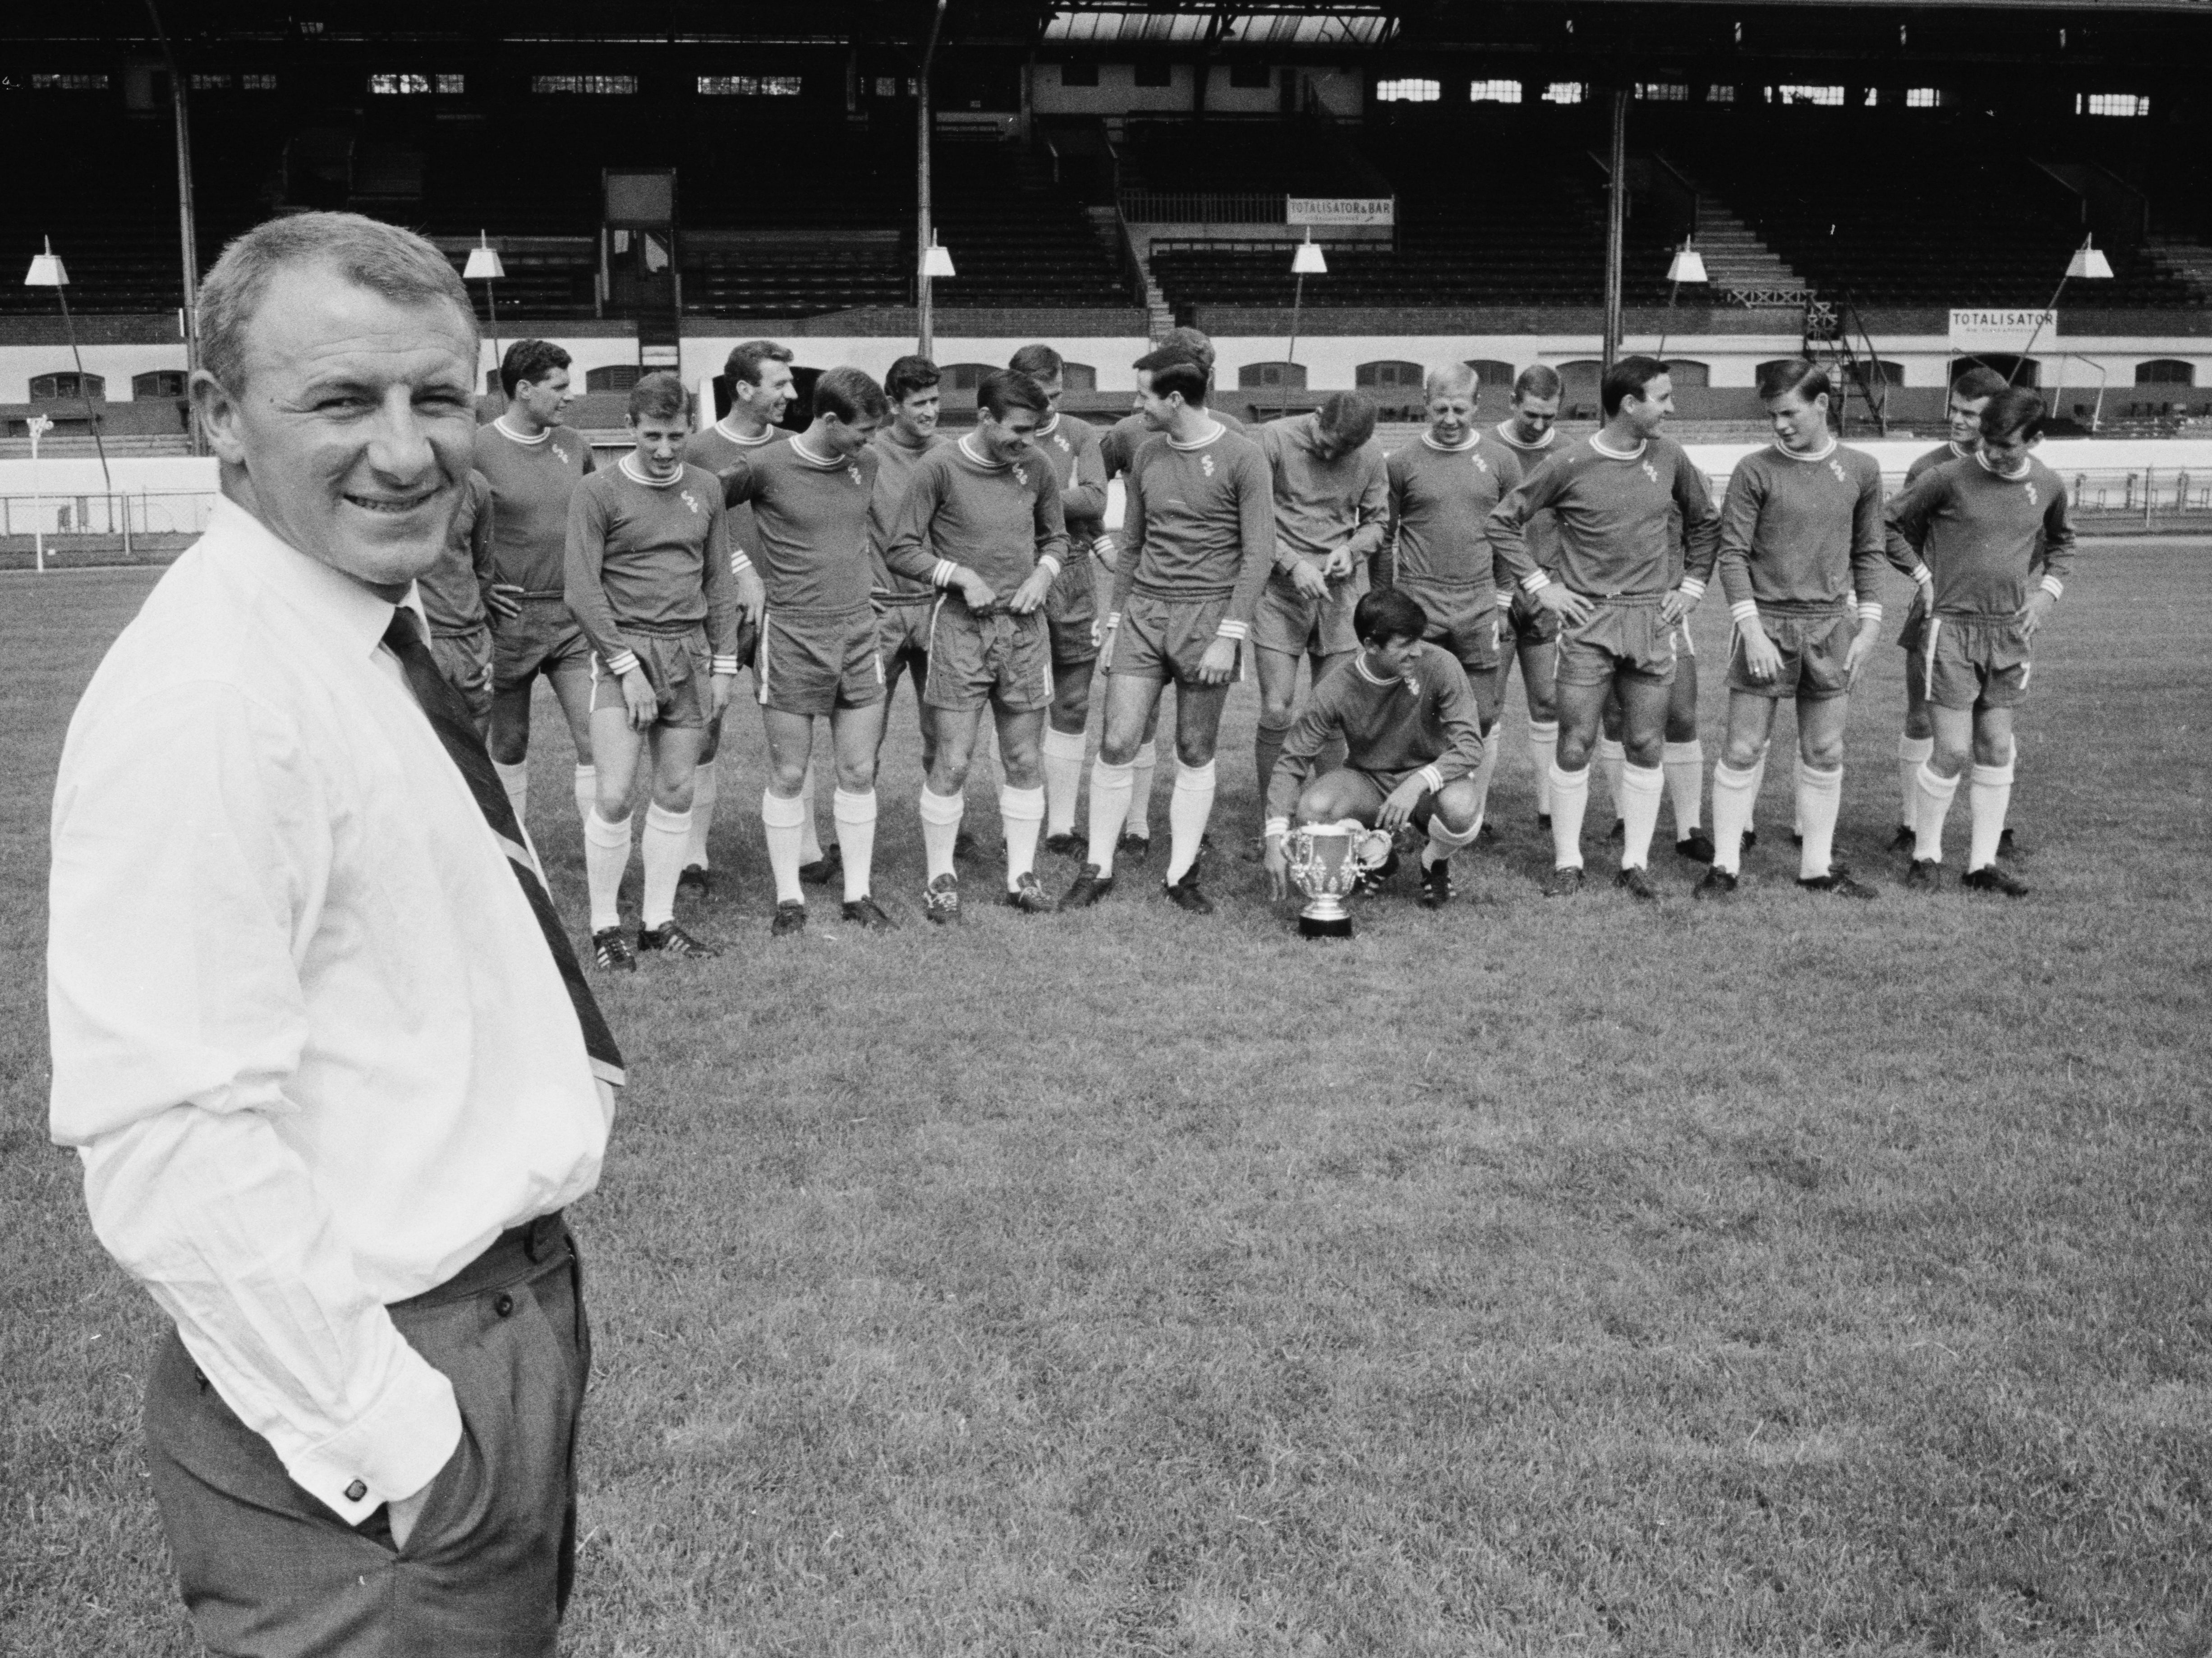 Docherty (foreground) and his Chelsea squad organise for a portrait in 1965